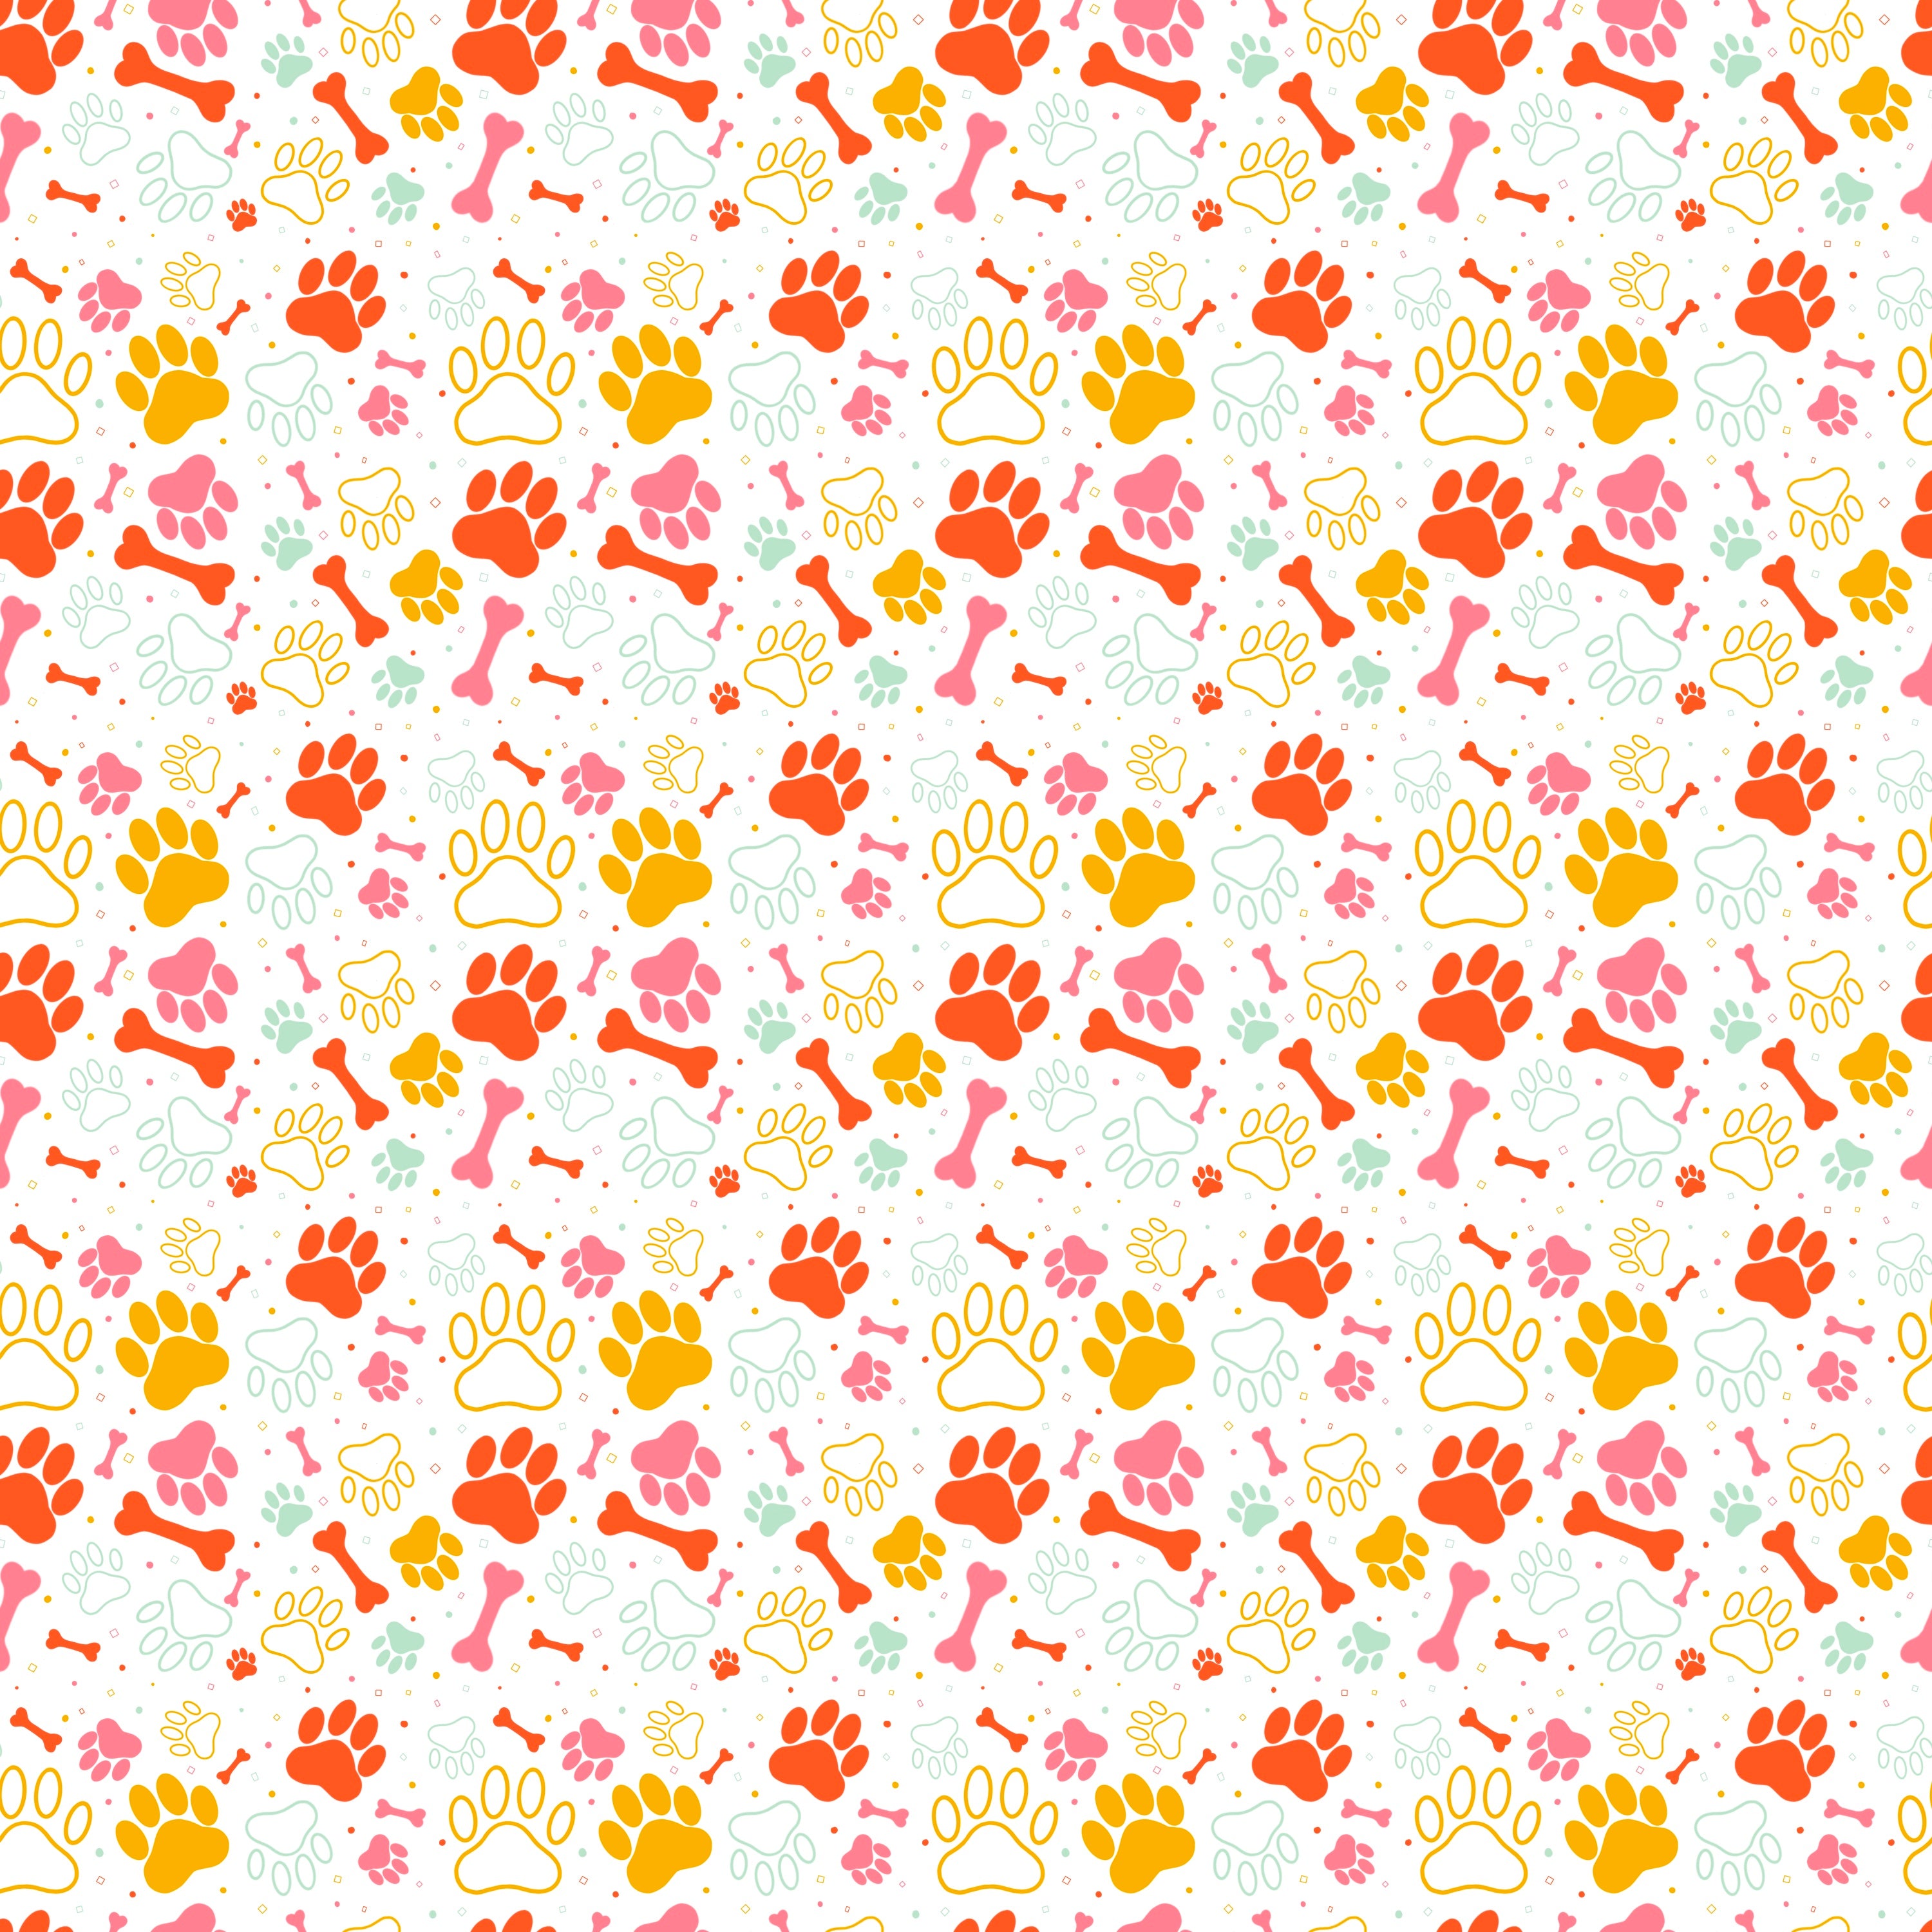 Doggy Paws Wallpaper